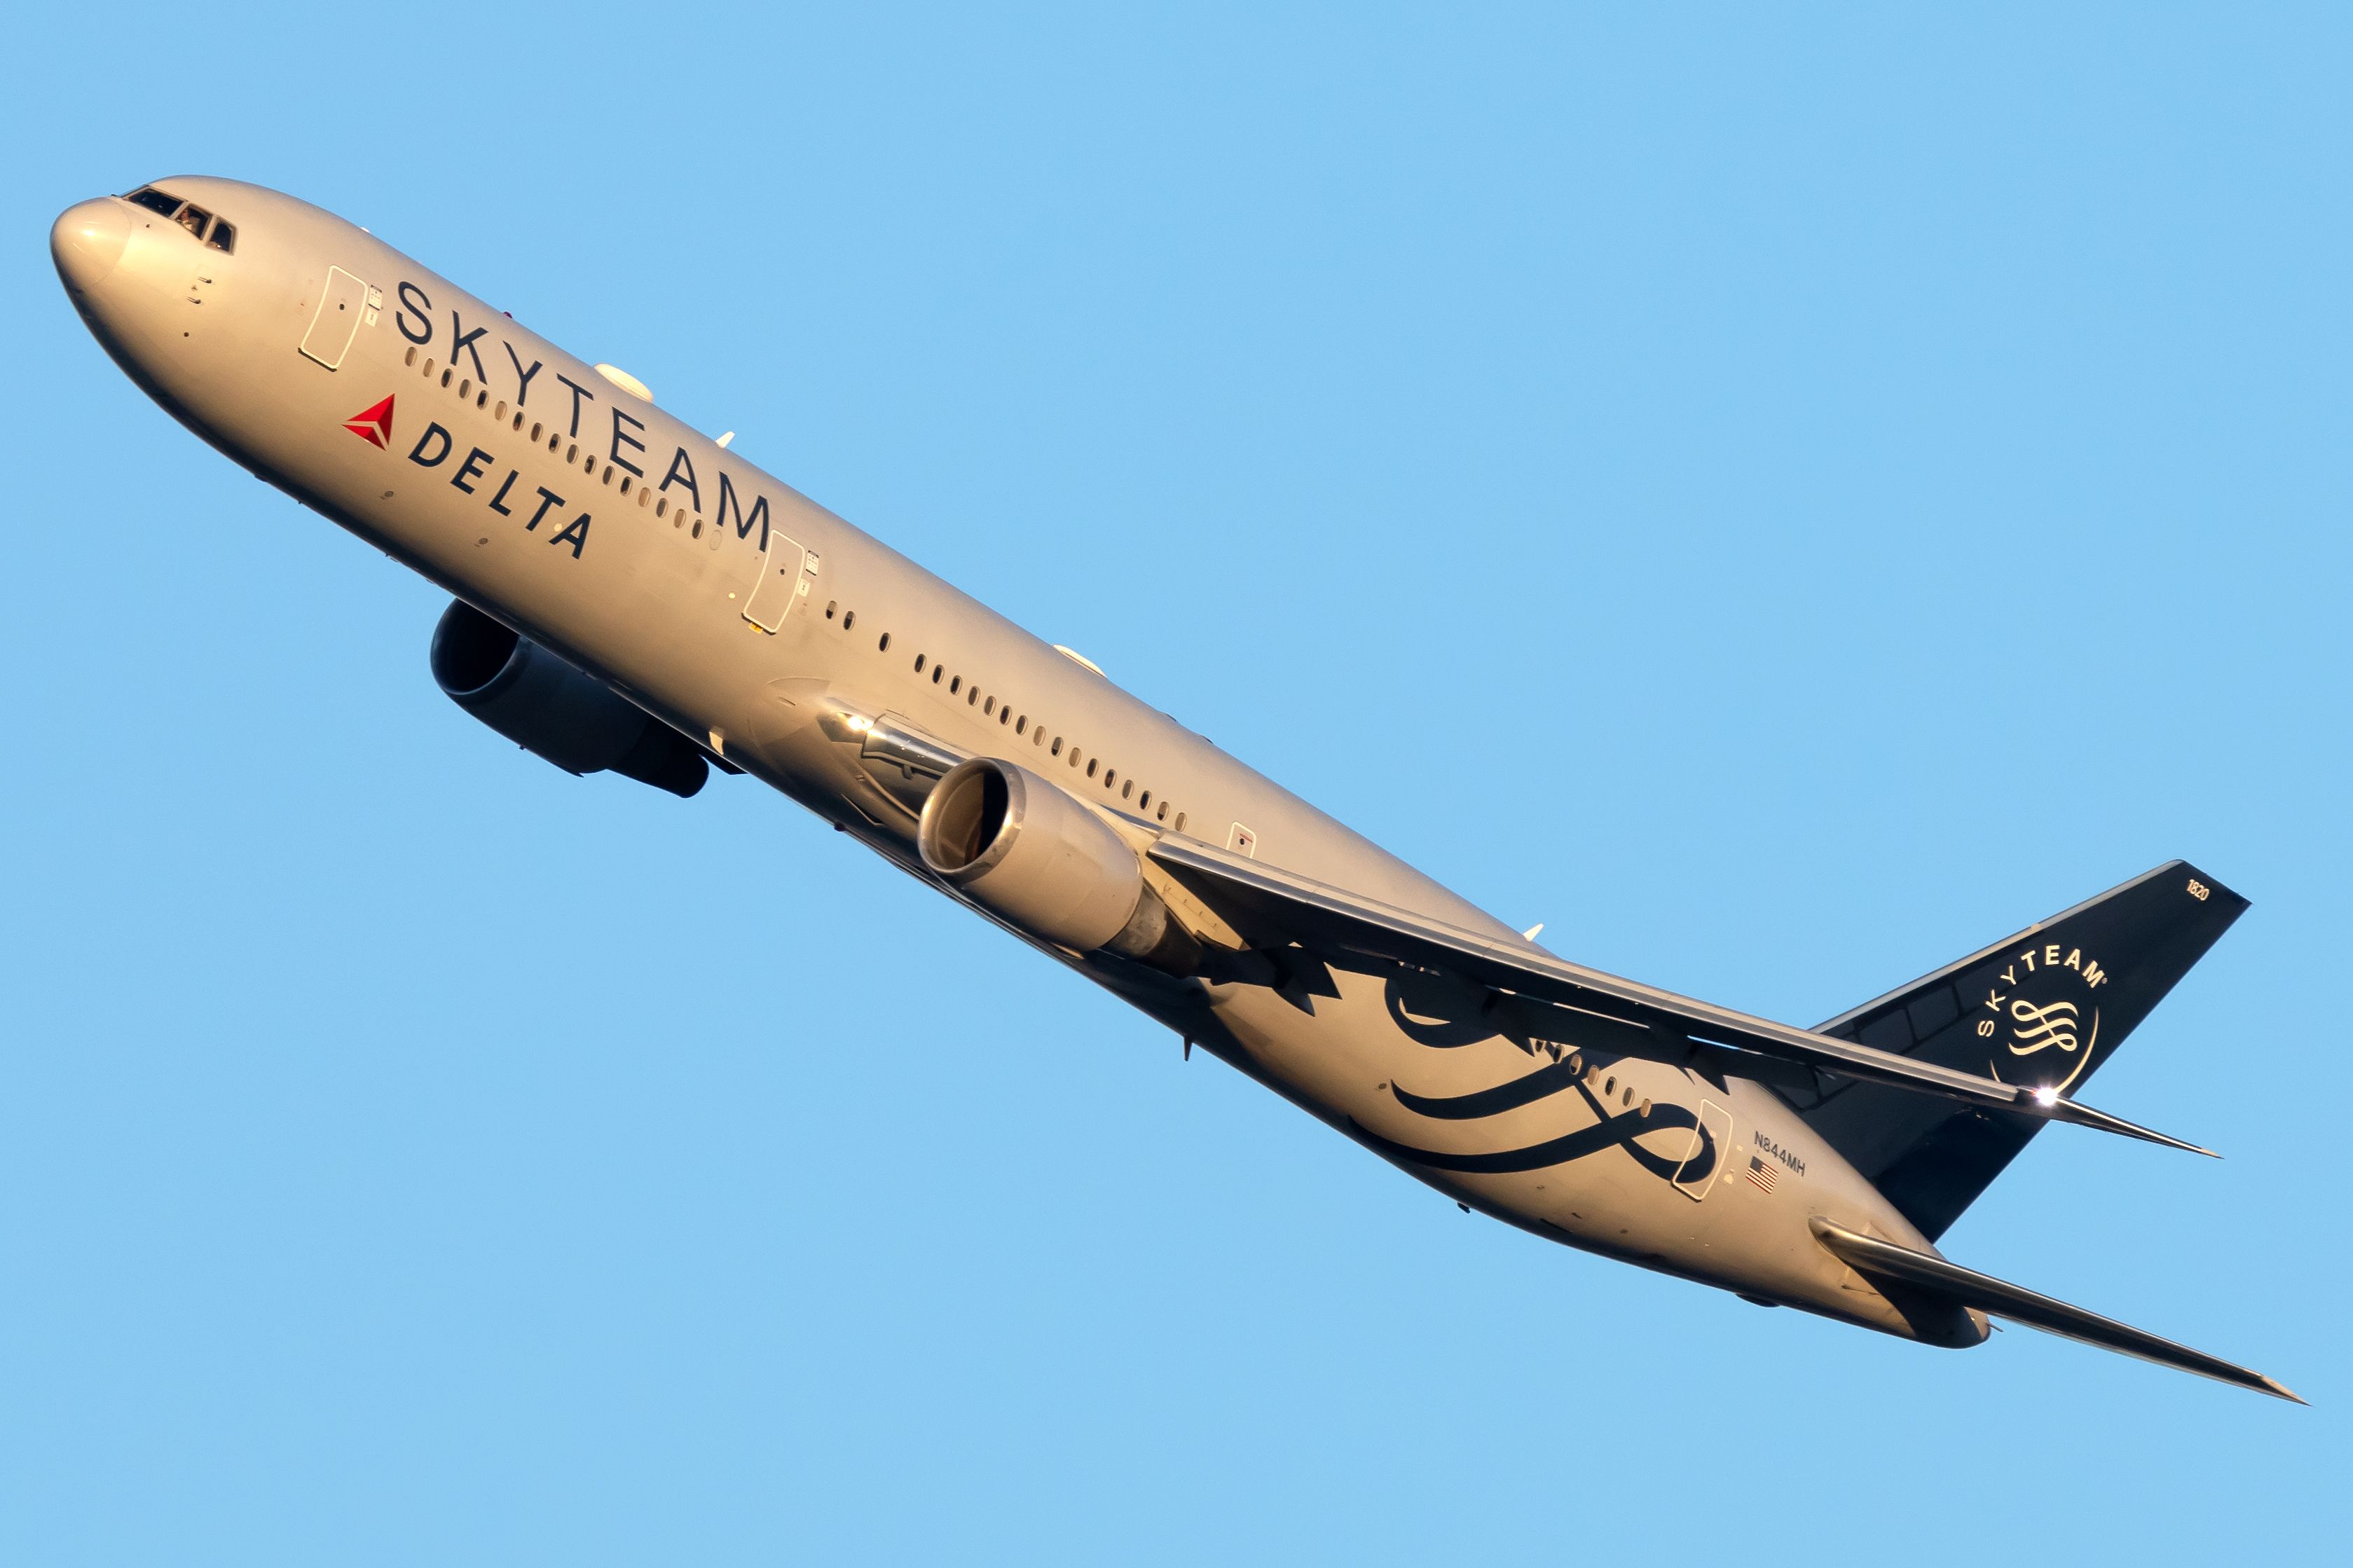 Delta Air Lines SkyTeam Livery Boeing 767